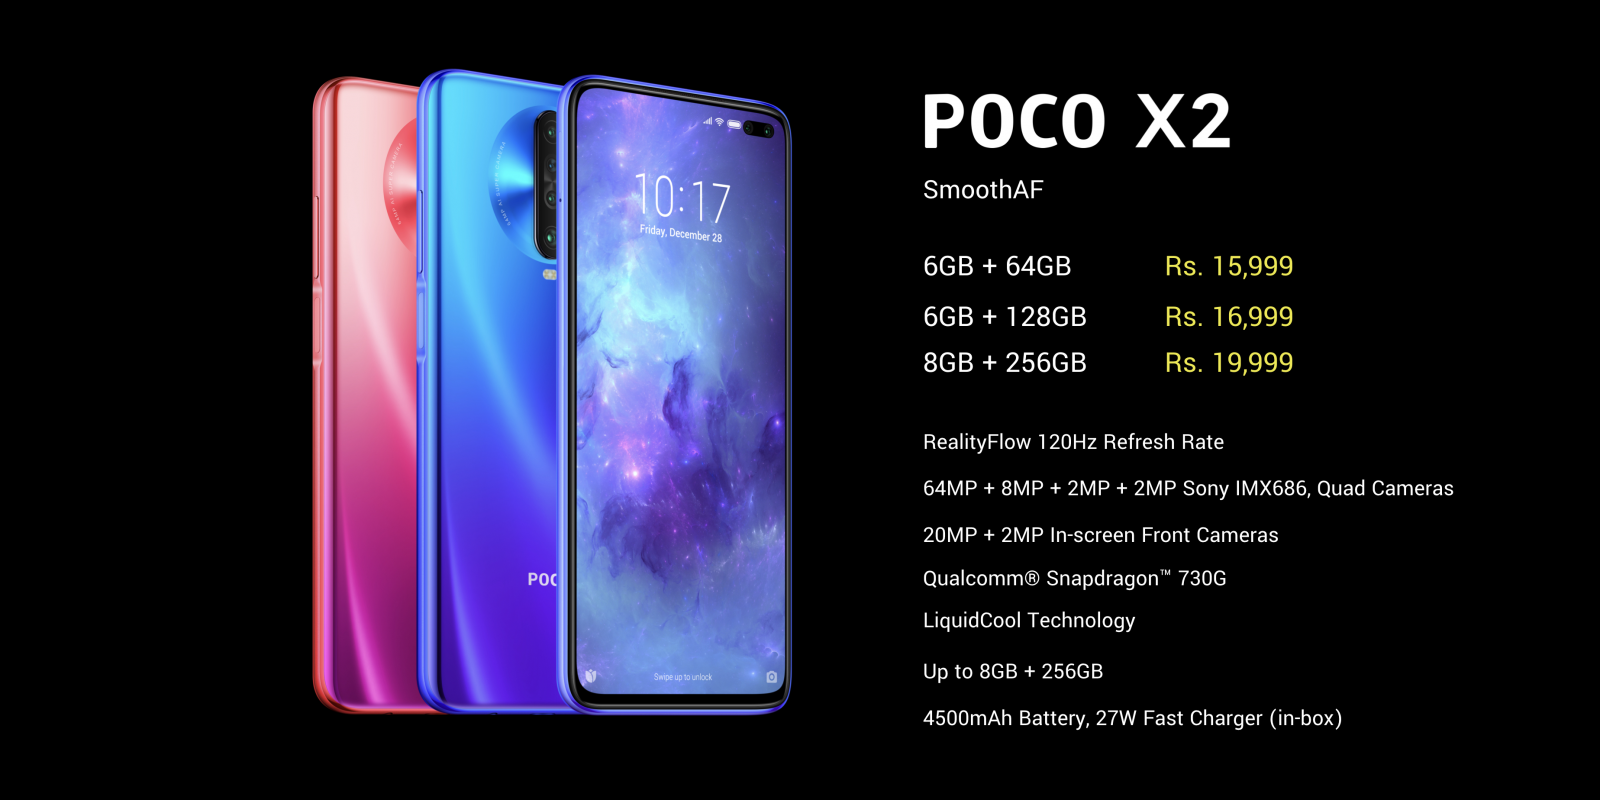 POCO X2 pricing and variants